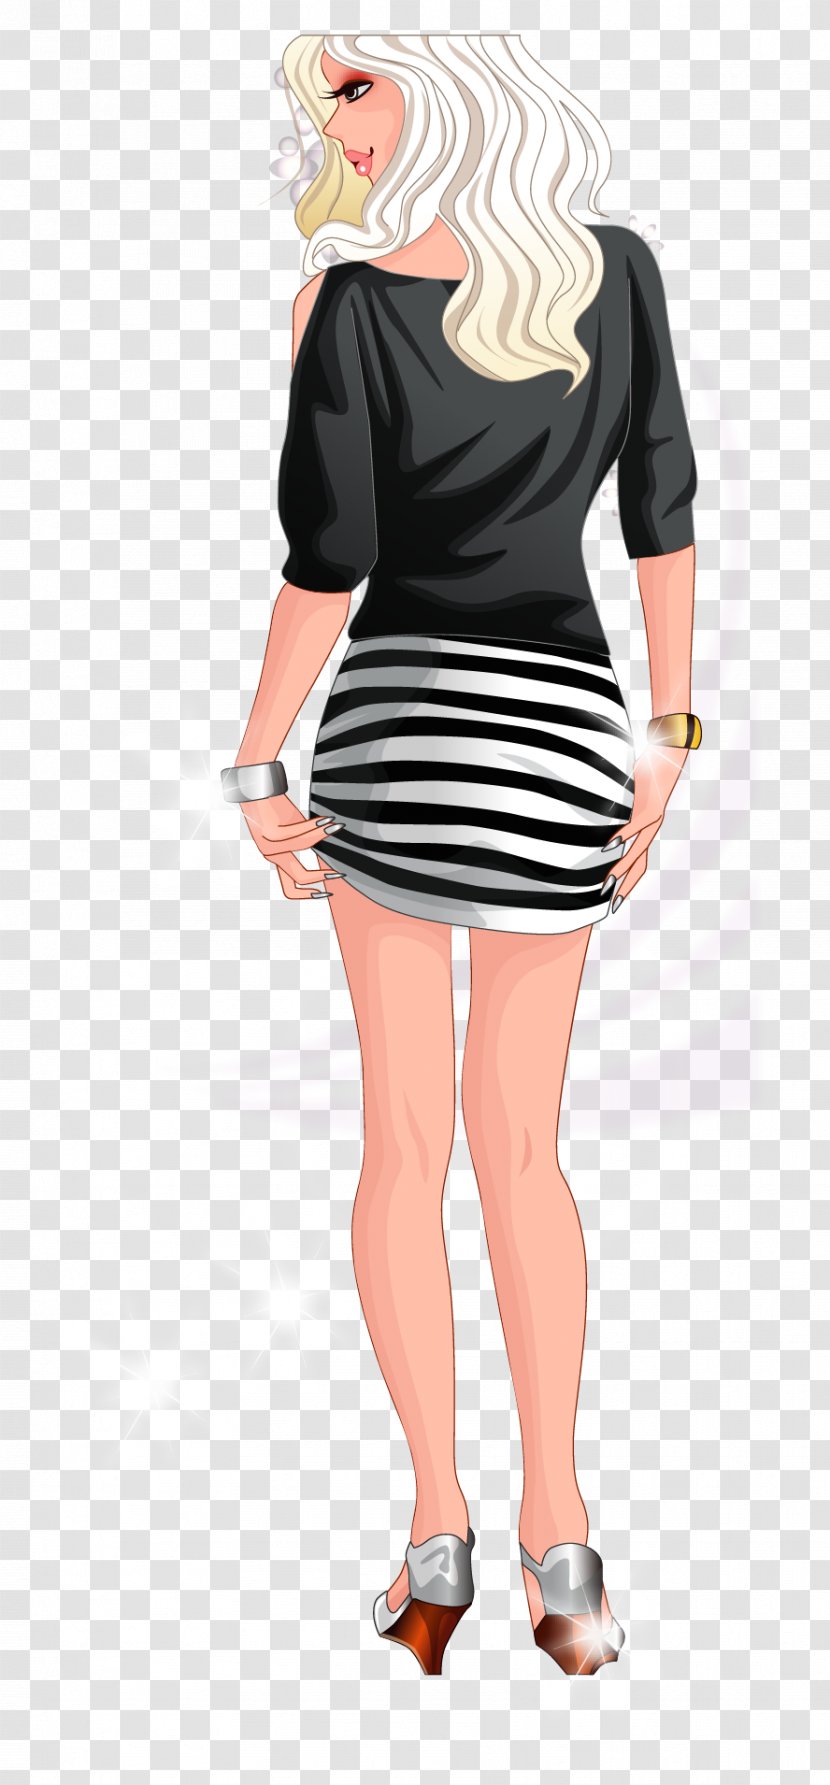 Black And White Drawing - Watercolor - Hand Drawn Vector Woman Transparent PNG